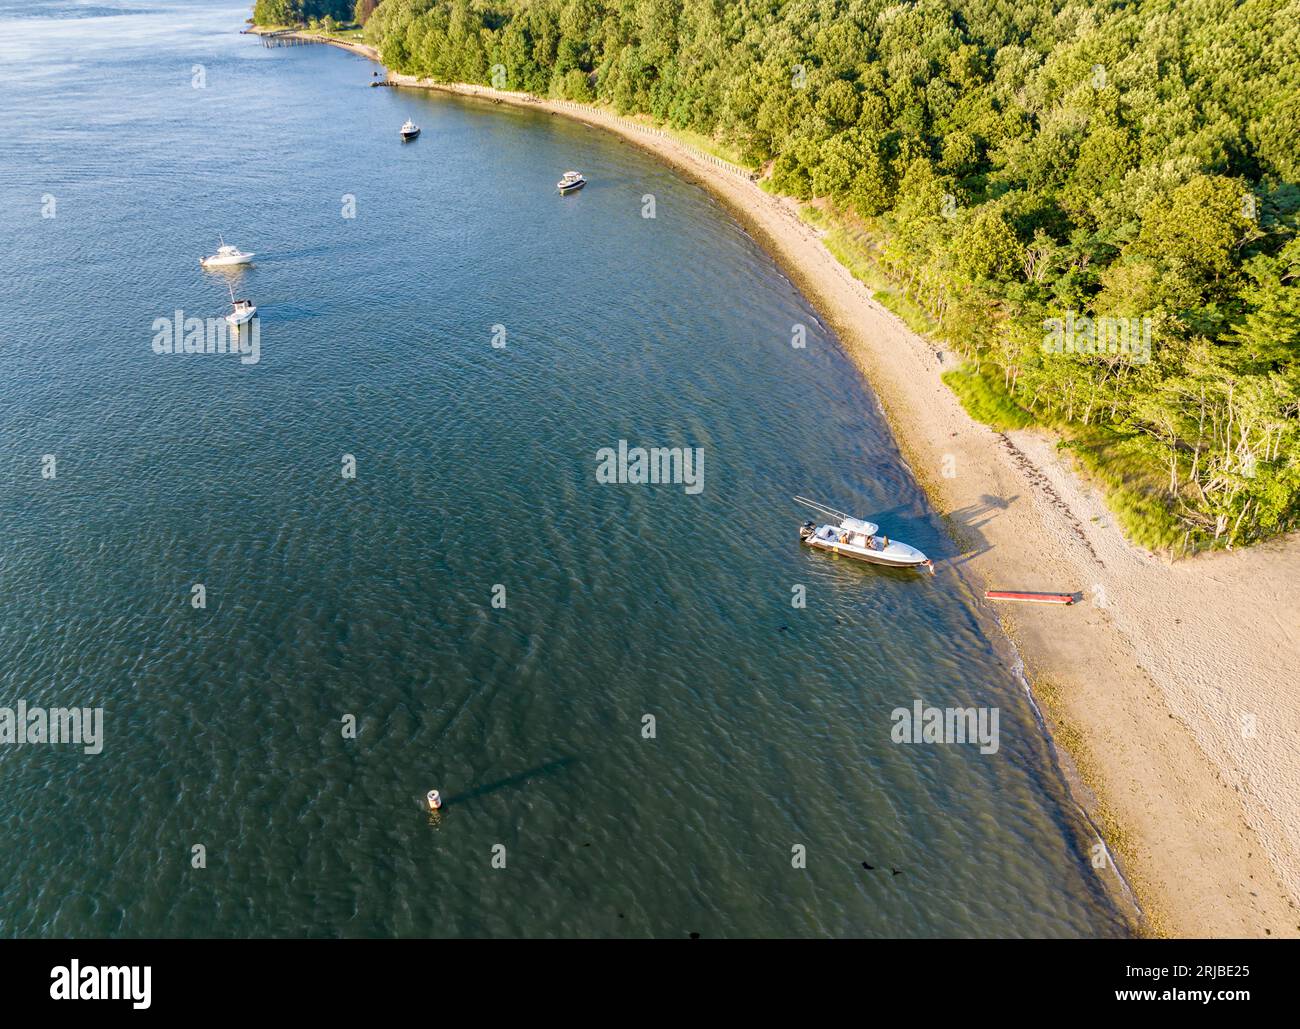 aerial view of a boat near crescent beach Stock Photo